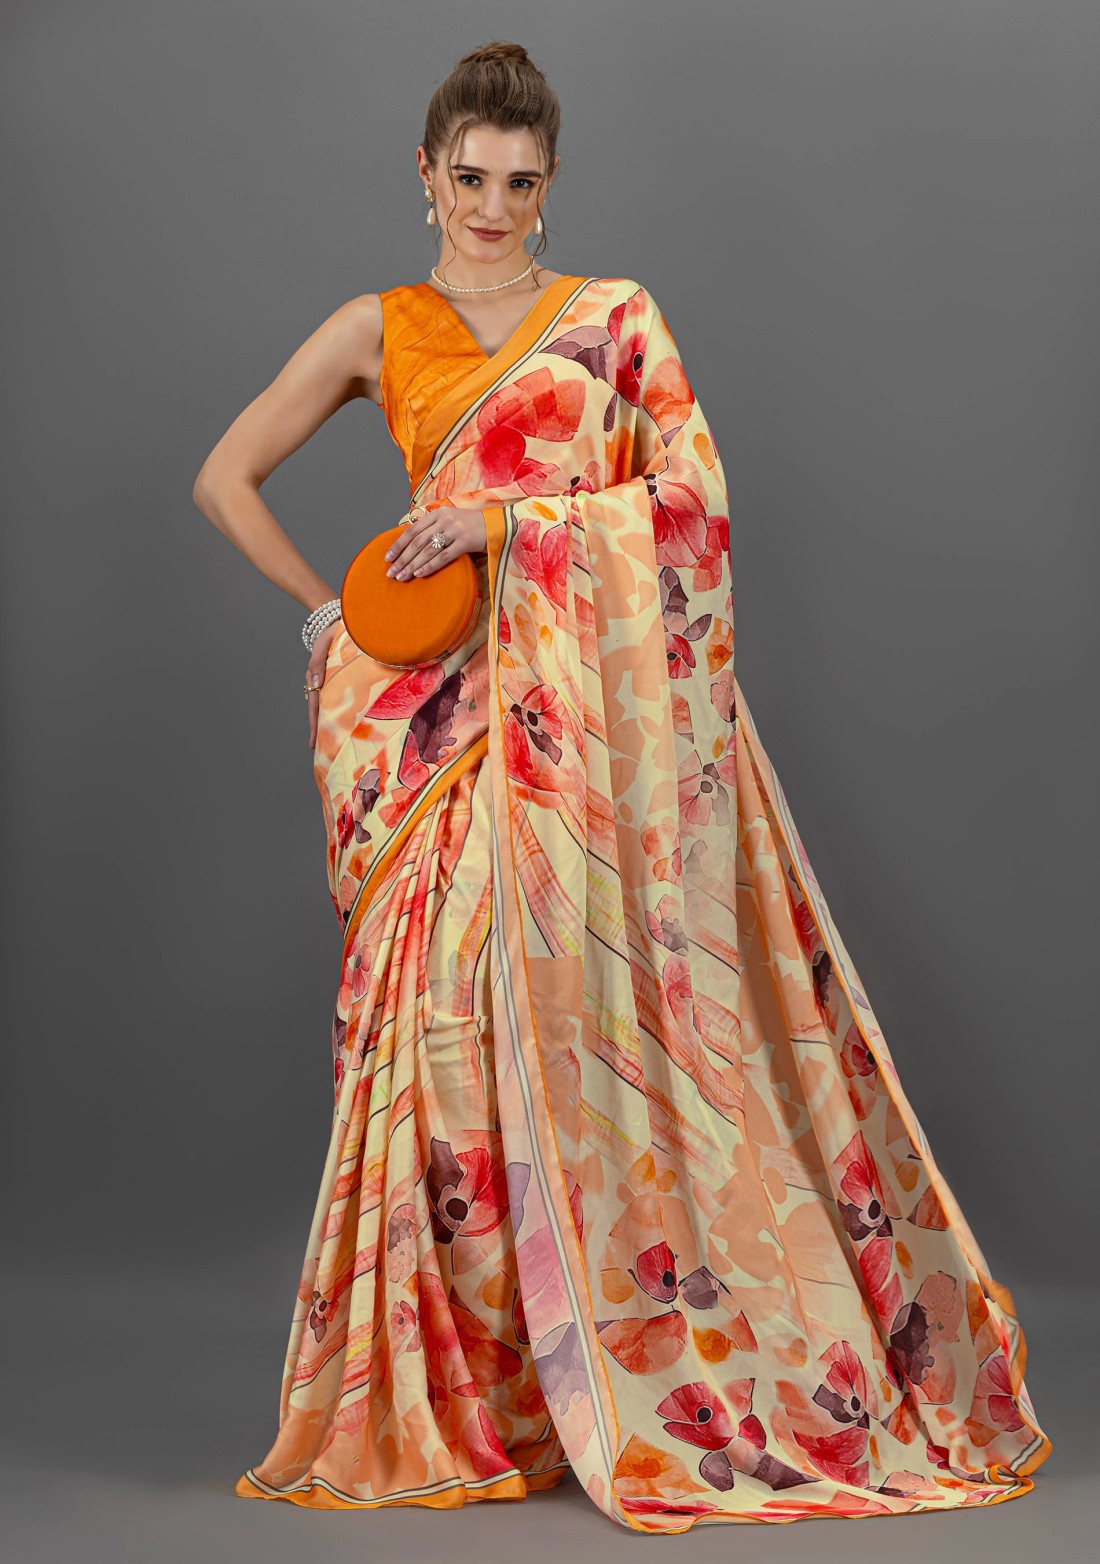 Mango Orange Abstract Floral Printed Lightweight Satin Georgette Saree With Unstitched Blouse